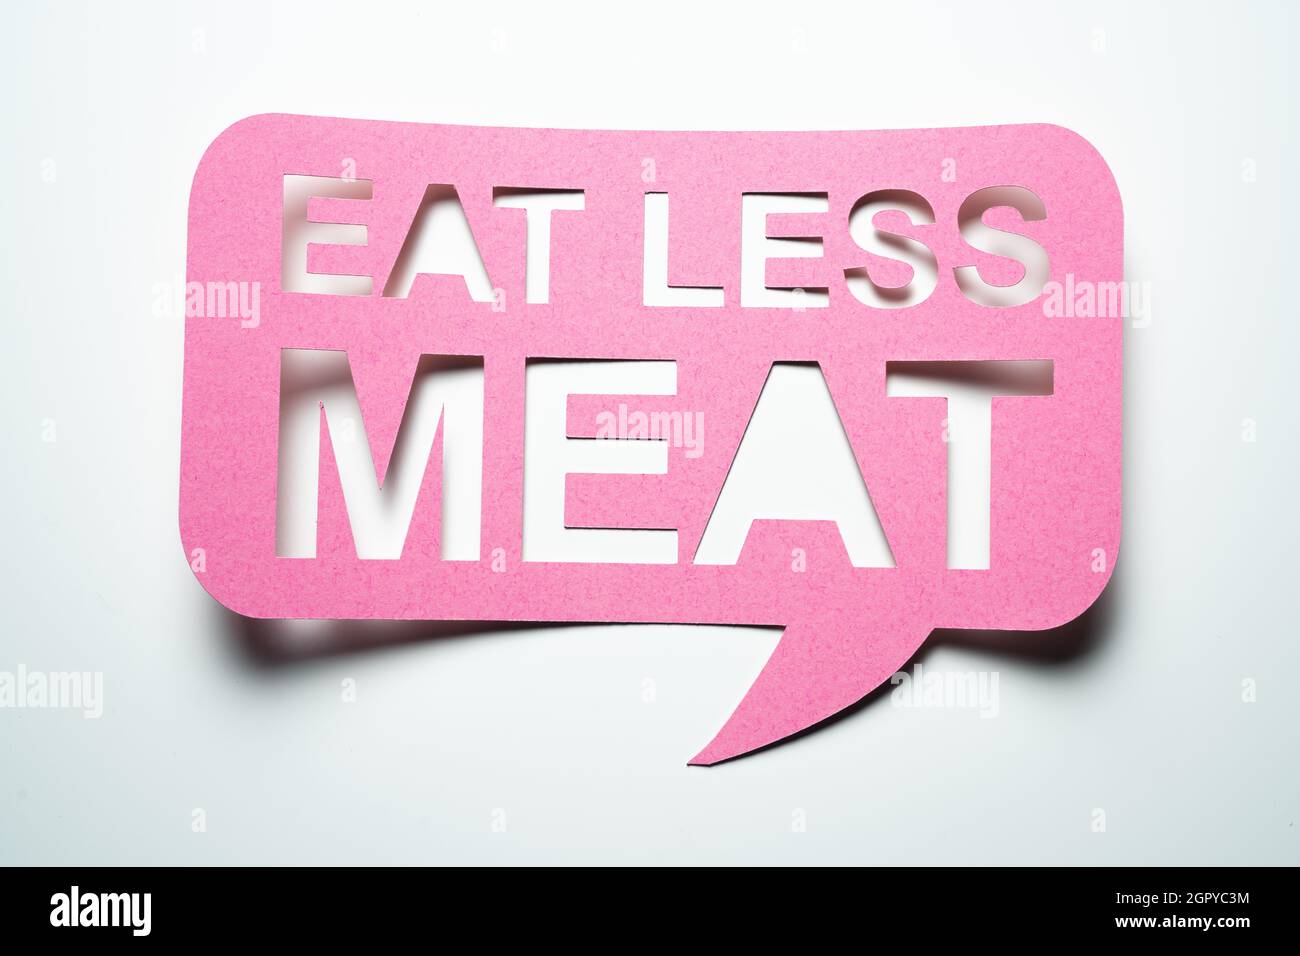 Eat Less Meat. Diet Restriction And Avoidance Stock Photo